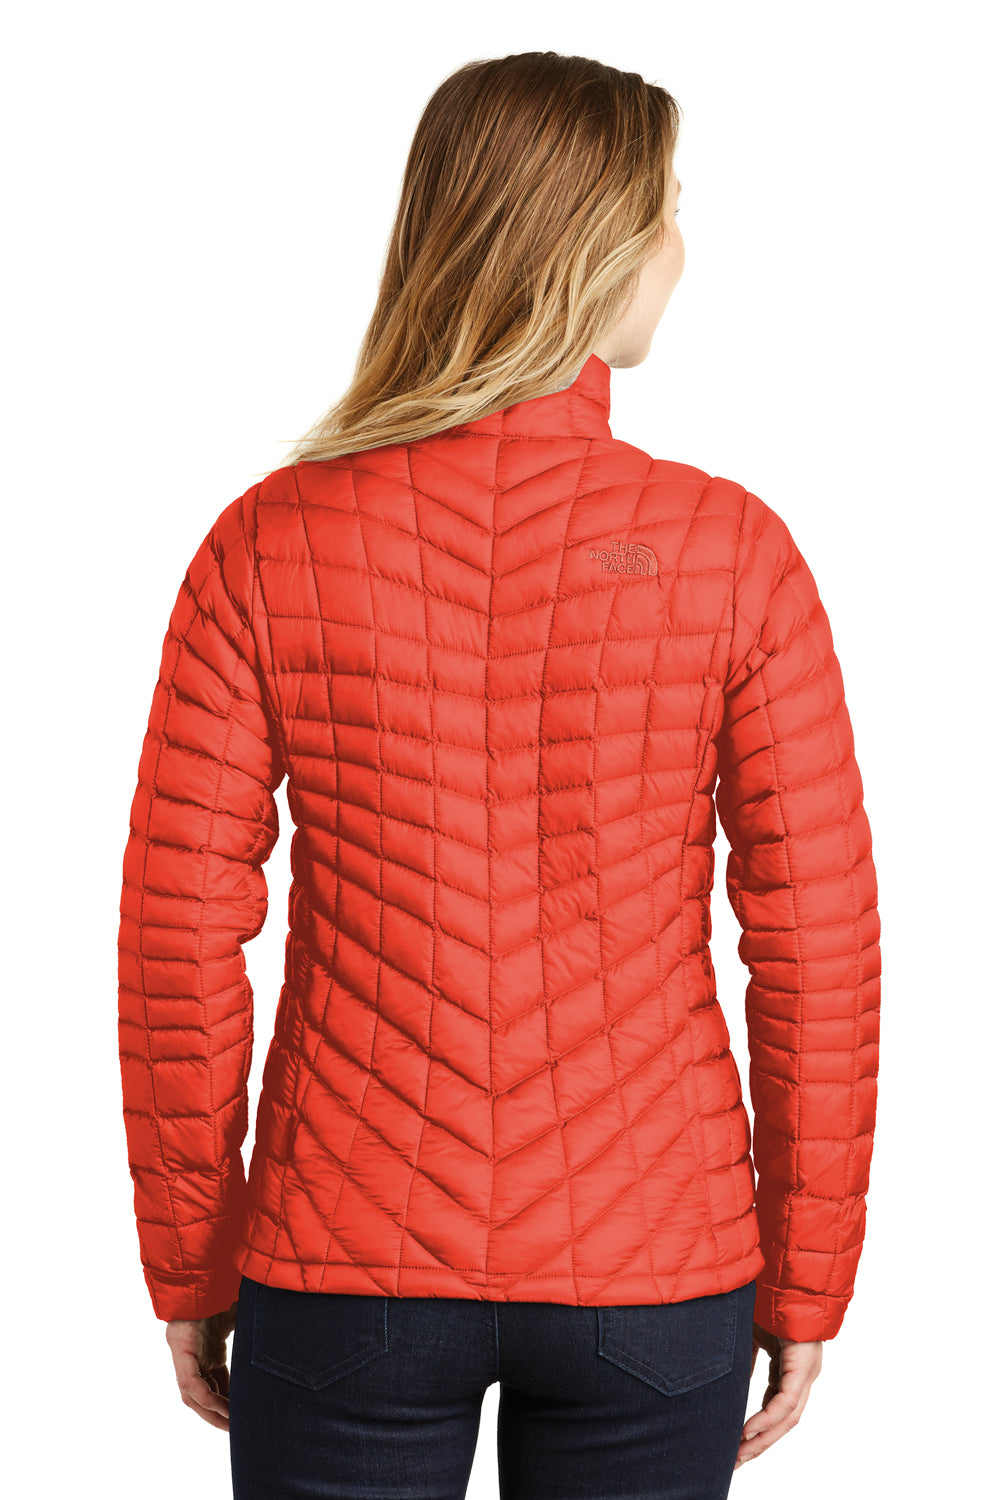 The North Face NF0A3LHK Womens ThermoBall Trekker Water Resistant Full Zip Jacket Brick Red Back